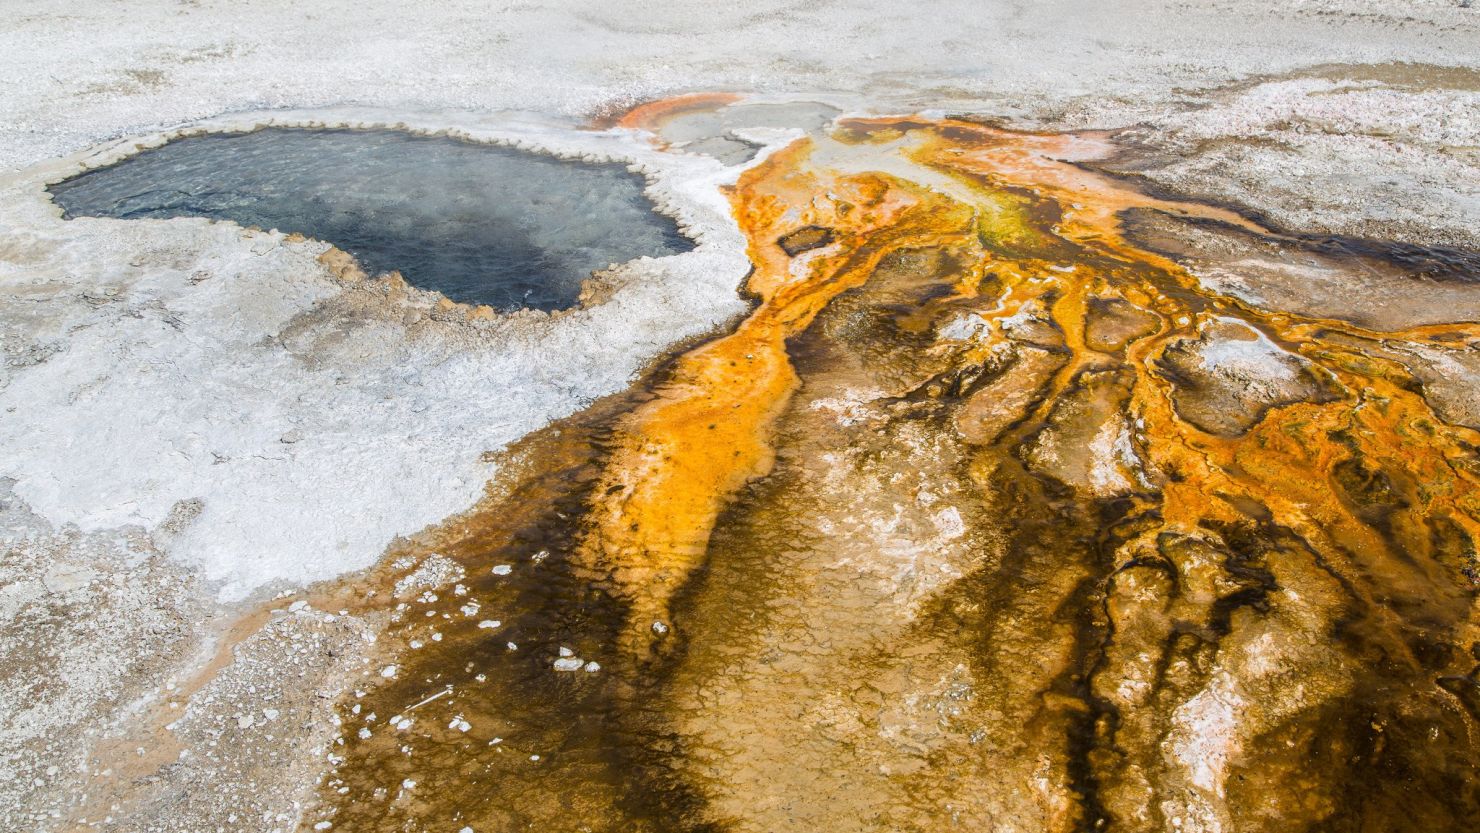 Yellowstone's Ear Spring geyser is normally a docile pool.